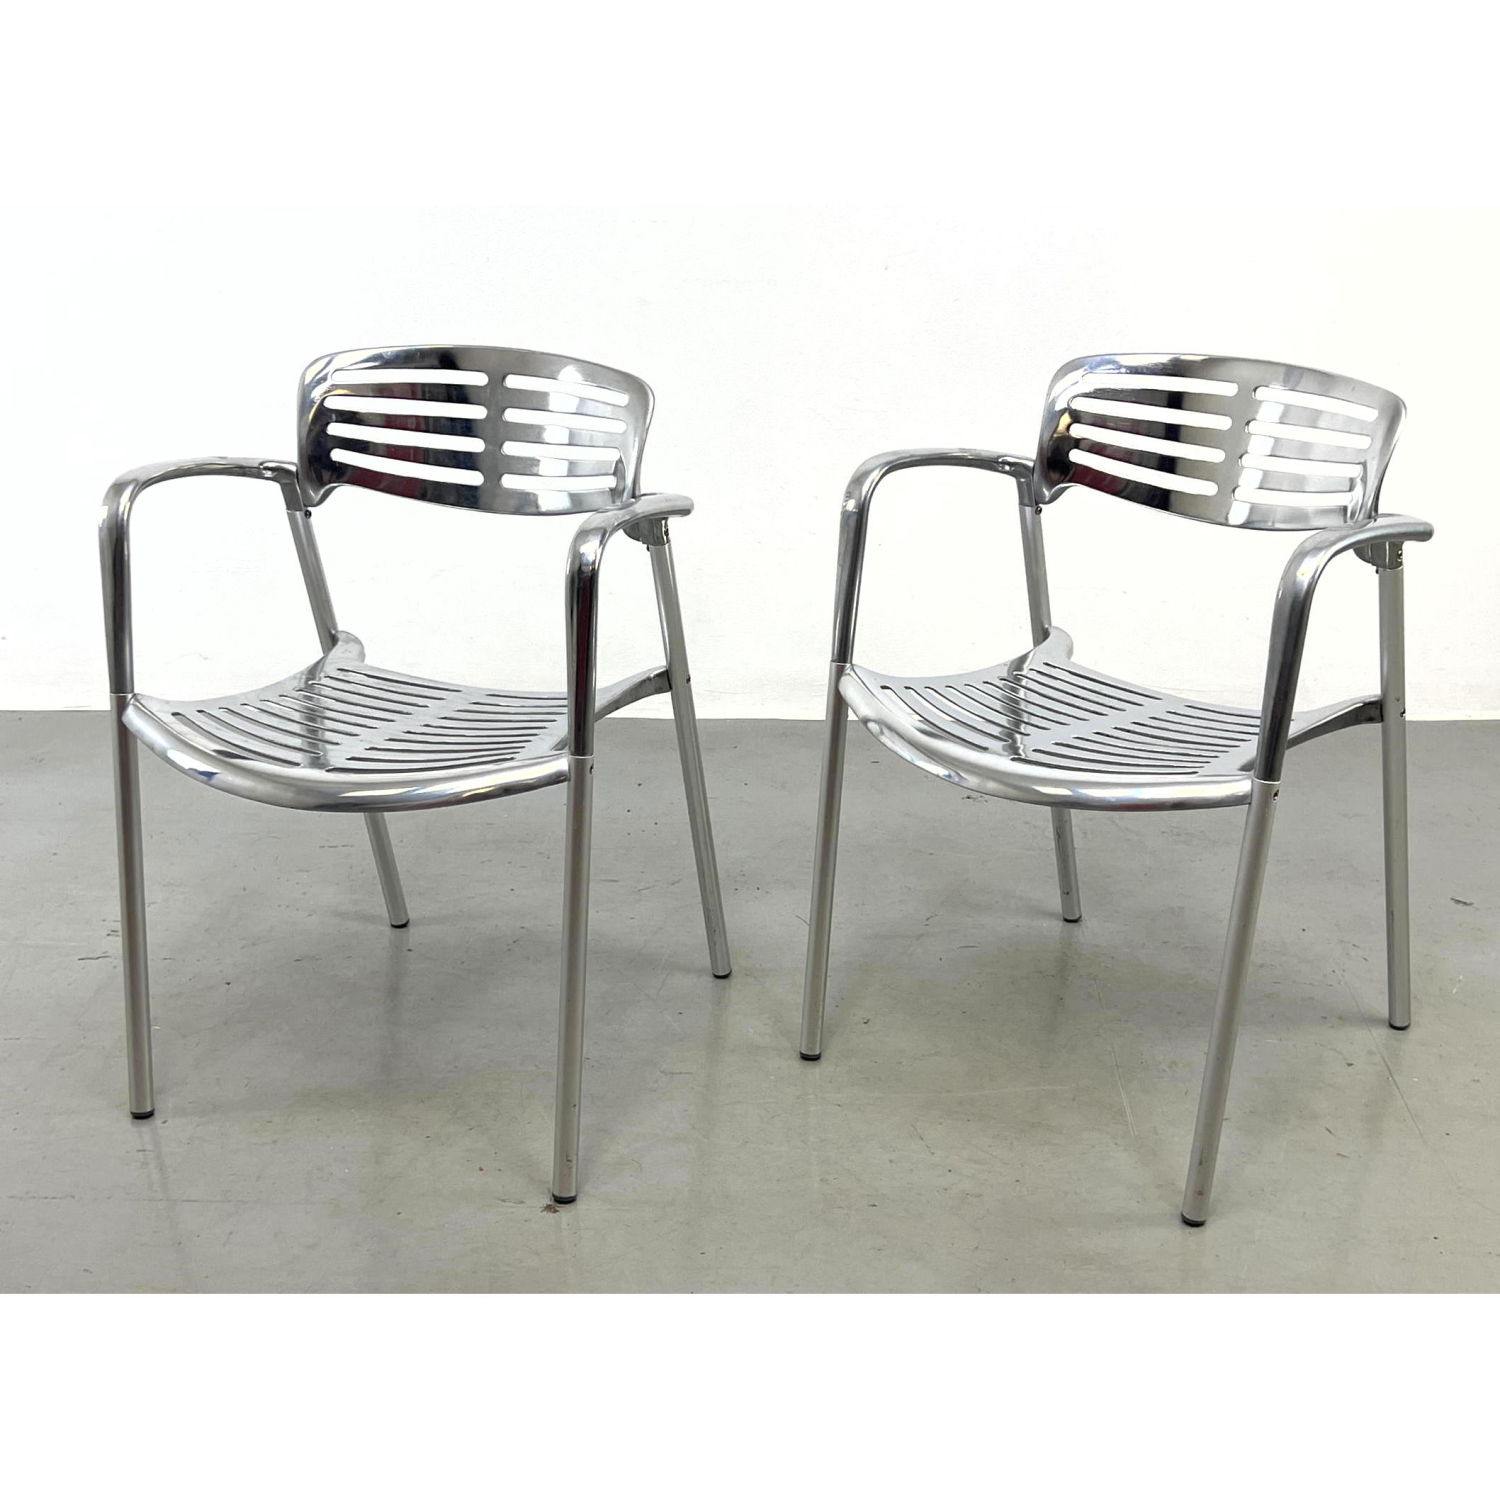 Pair Aluminum Arm Chairs. In the